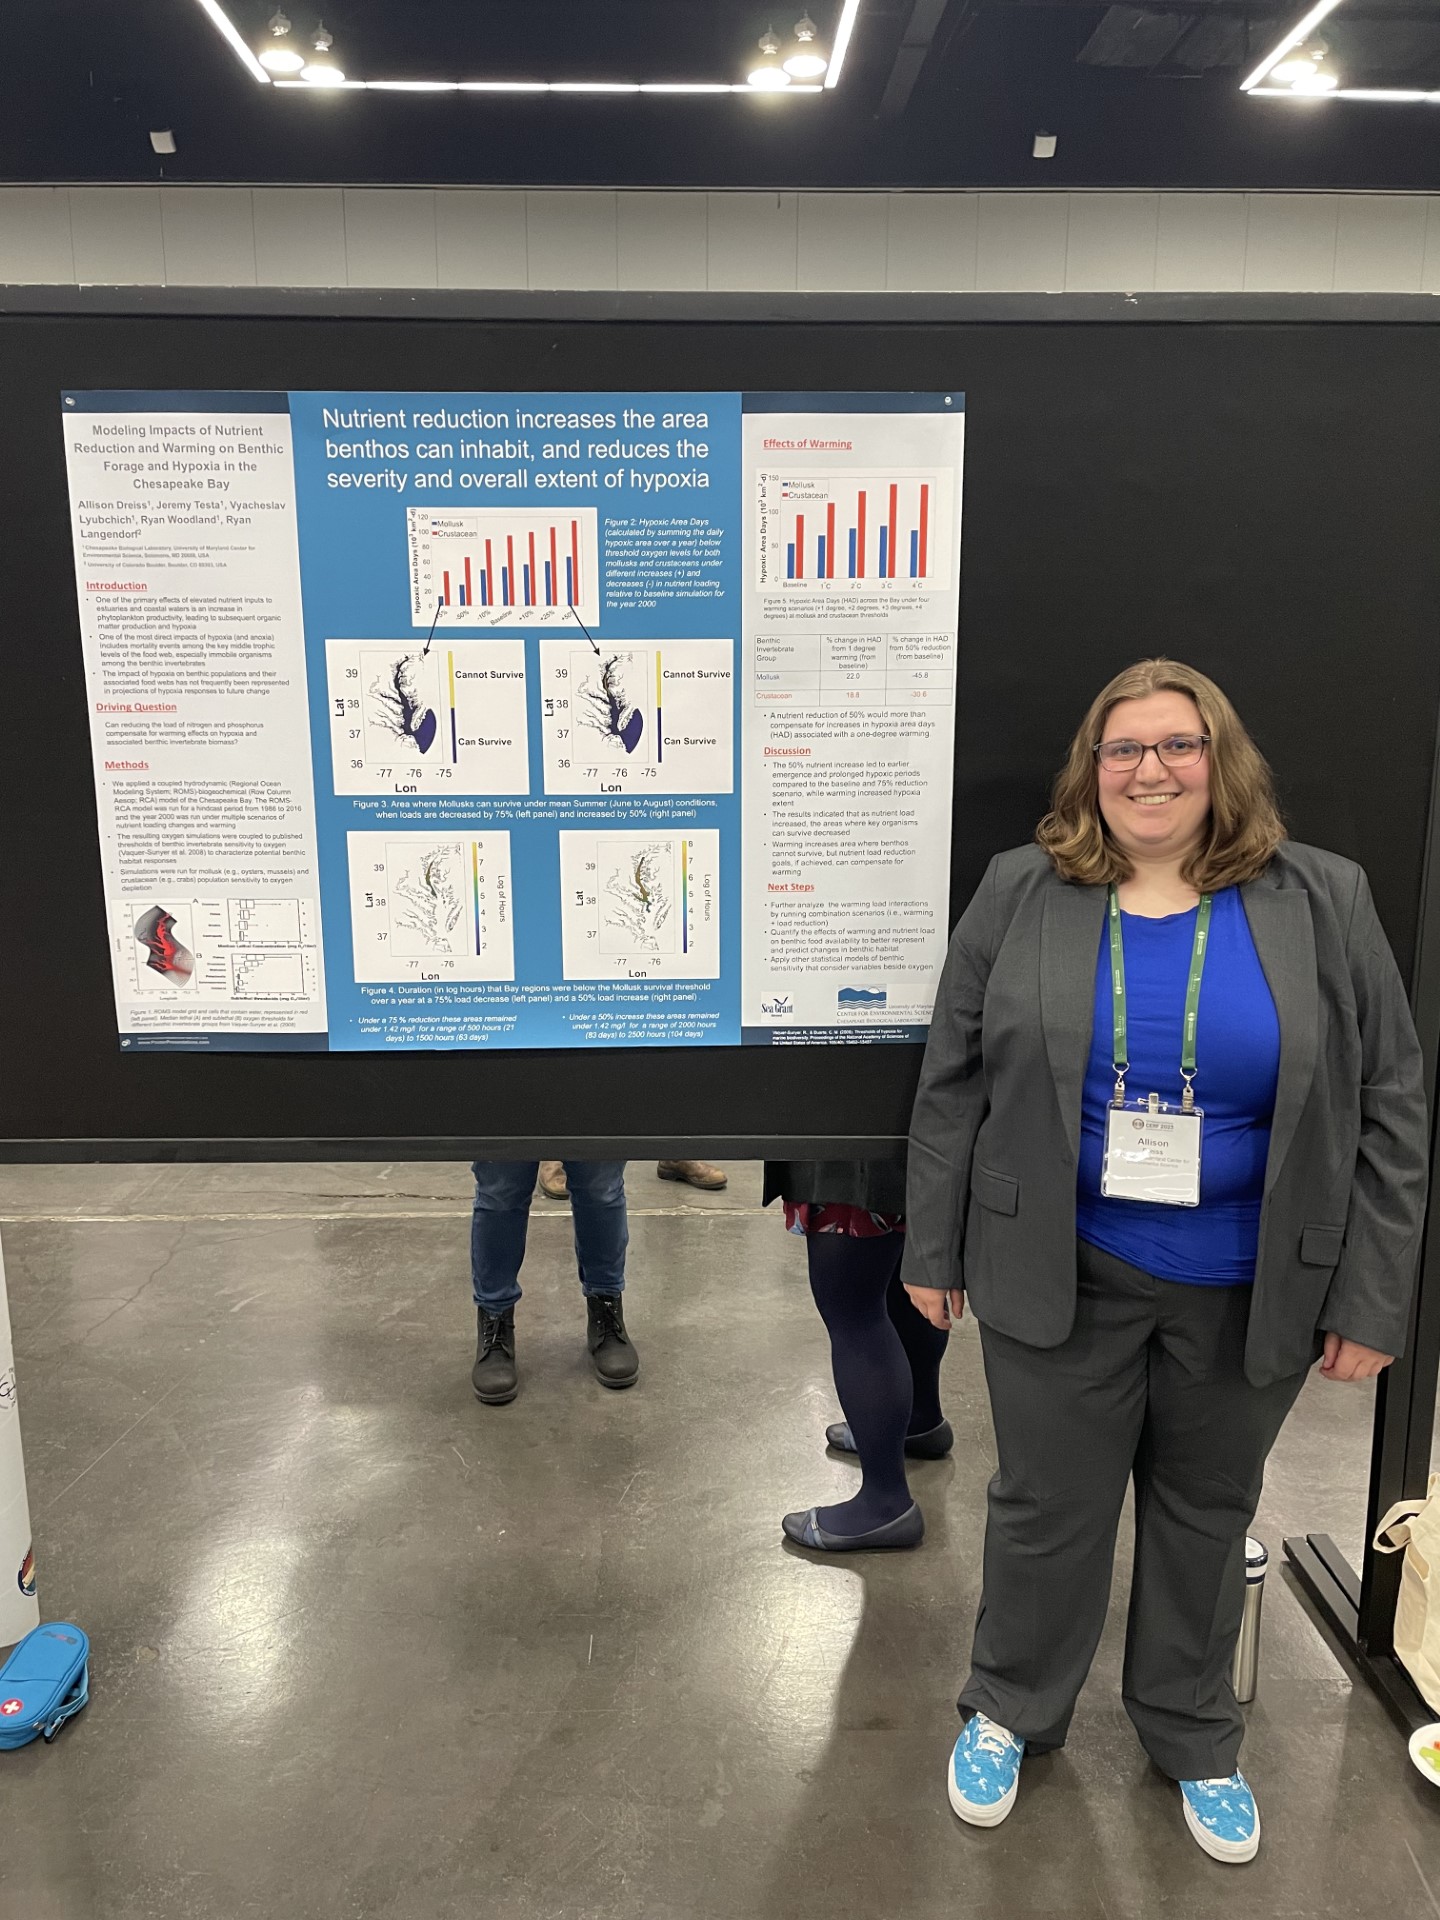 Allison Dreiss smiles standing next to her scientific poster at a conference